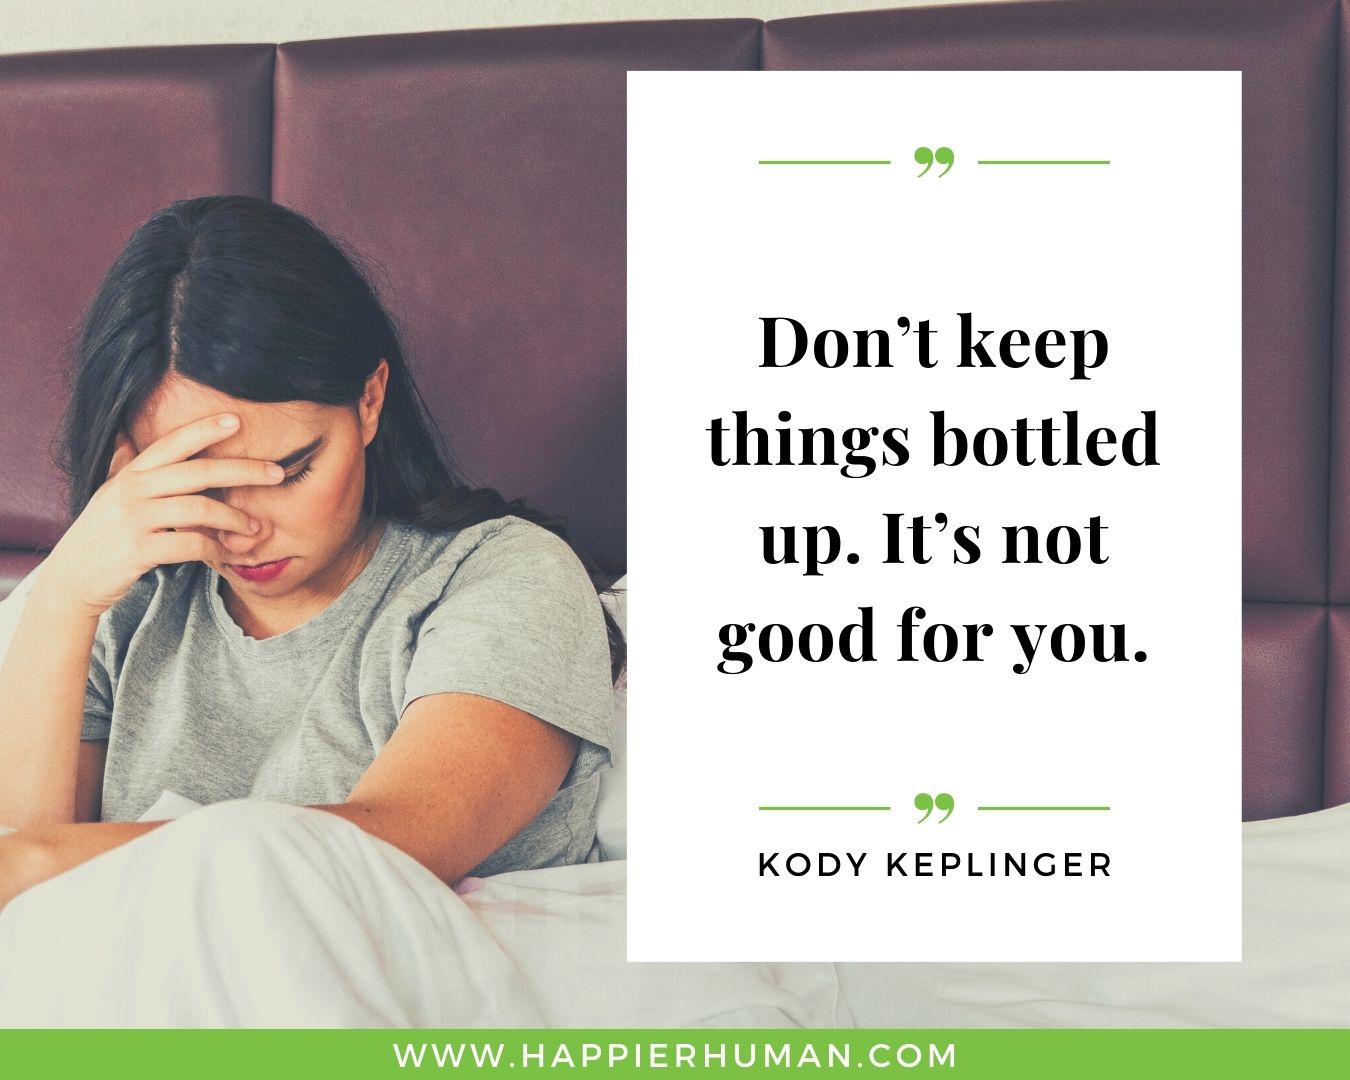 Overthinking Quotes - "Don’t keep things bottled up. It’s not good for you." - Kody Keplinger